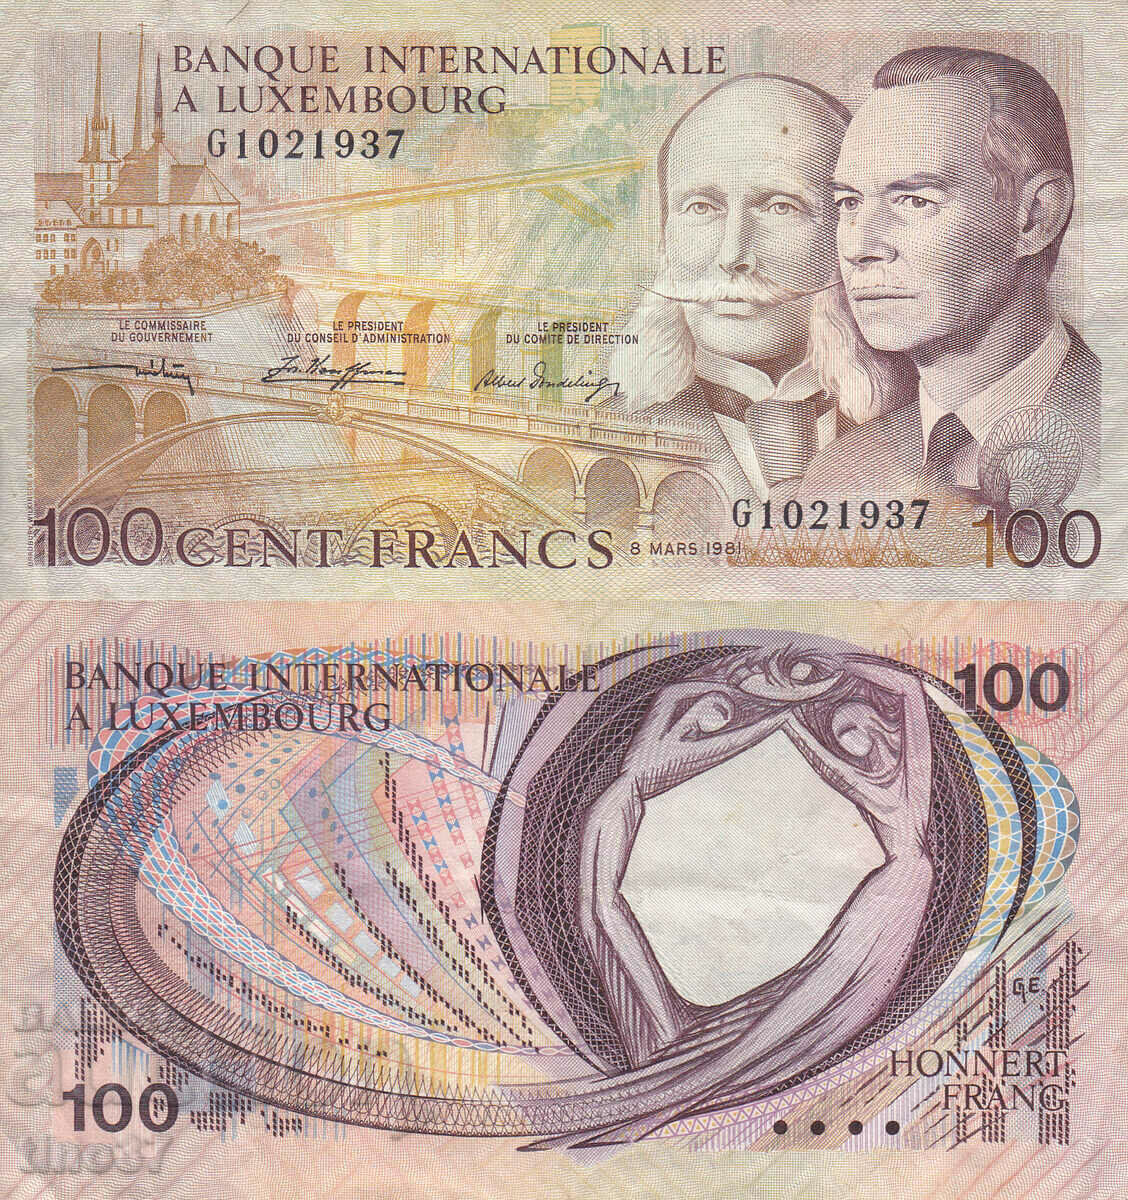 tino37- LUXEMBOURG - 100 FRANC - 1981